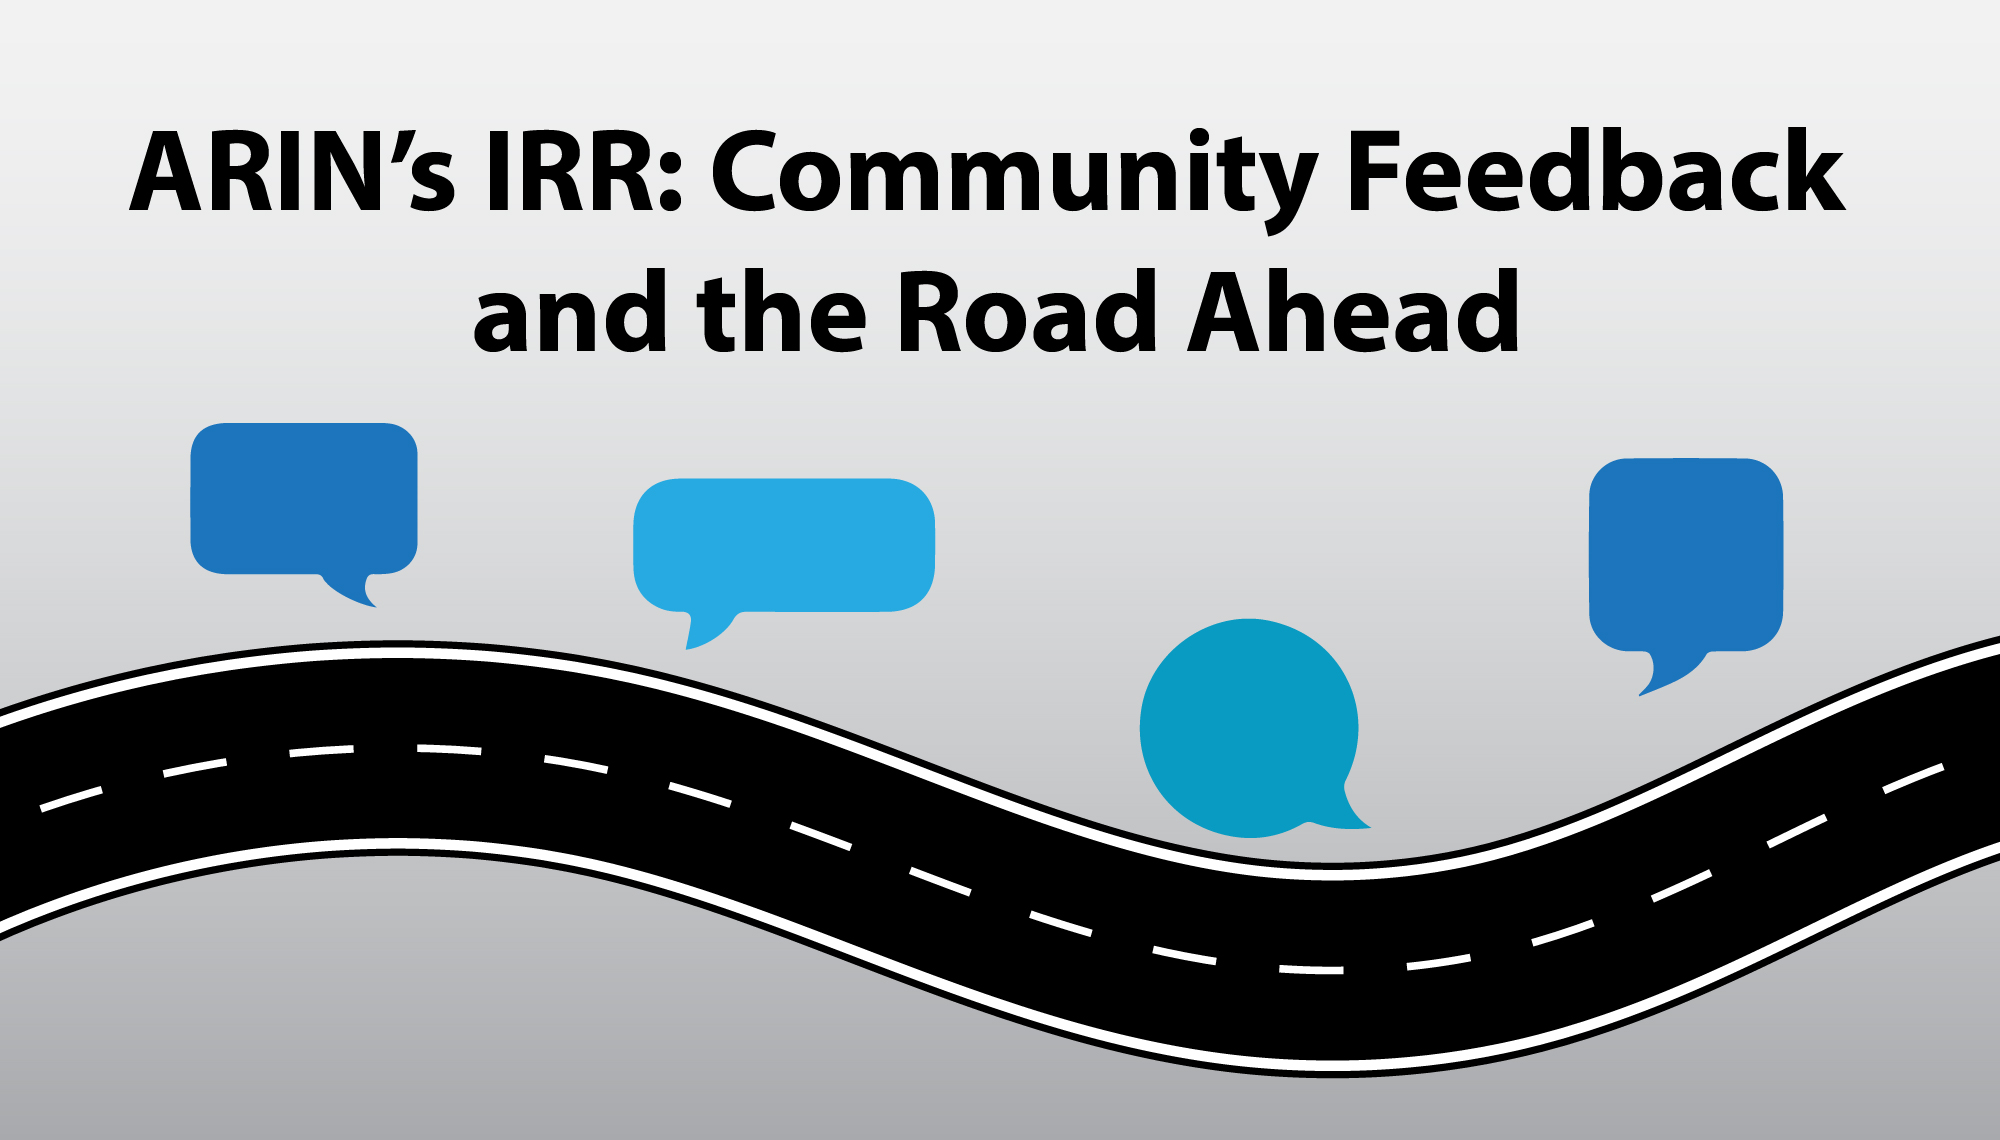 ARIN’s IRR: Community Feedback and the Road Ahead